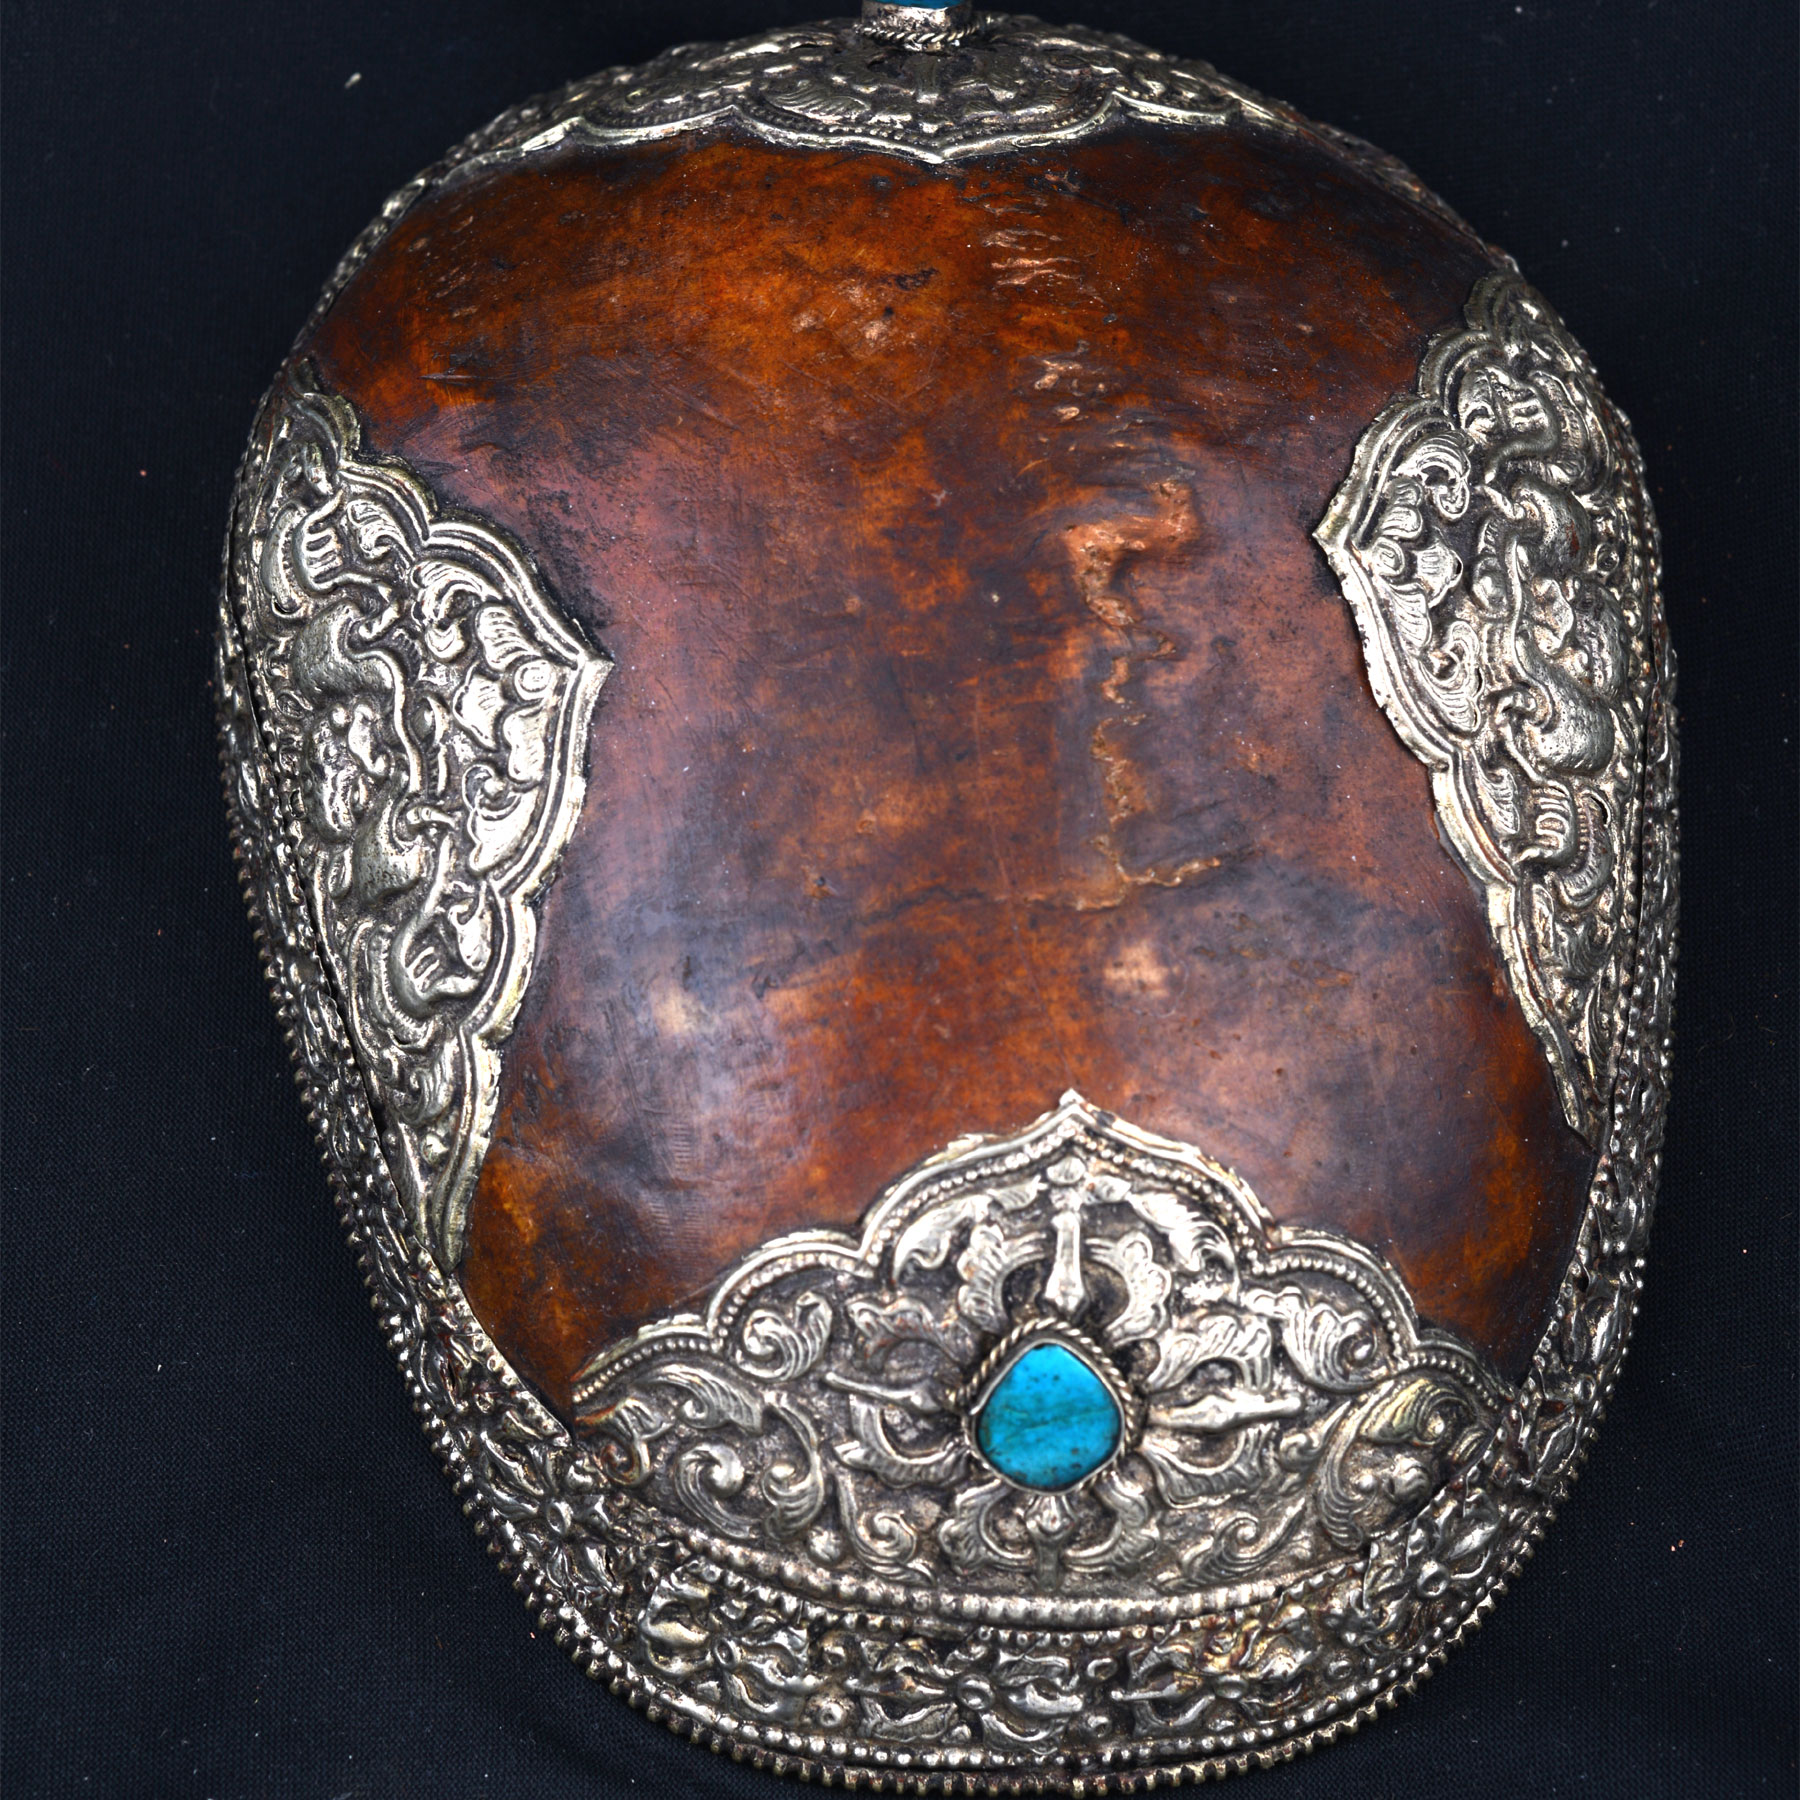 Kapala with Repousse Work & Turquoise Cabochons